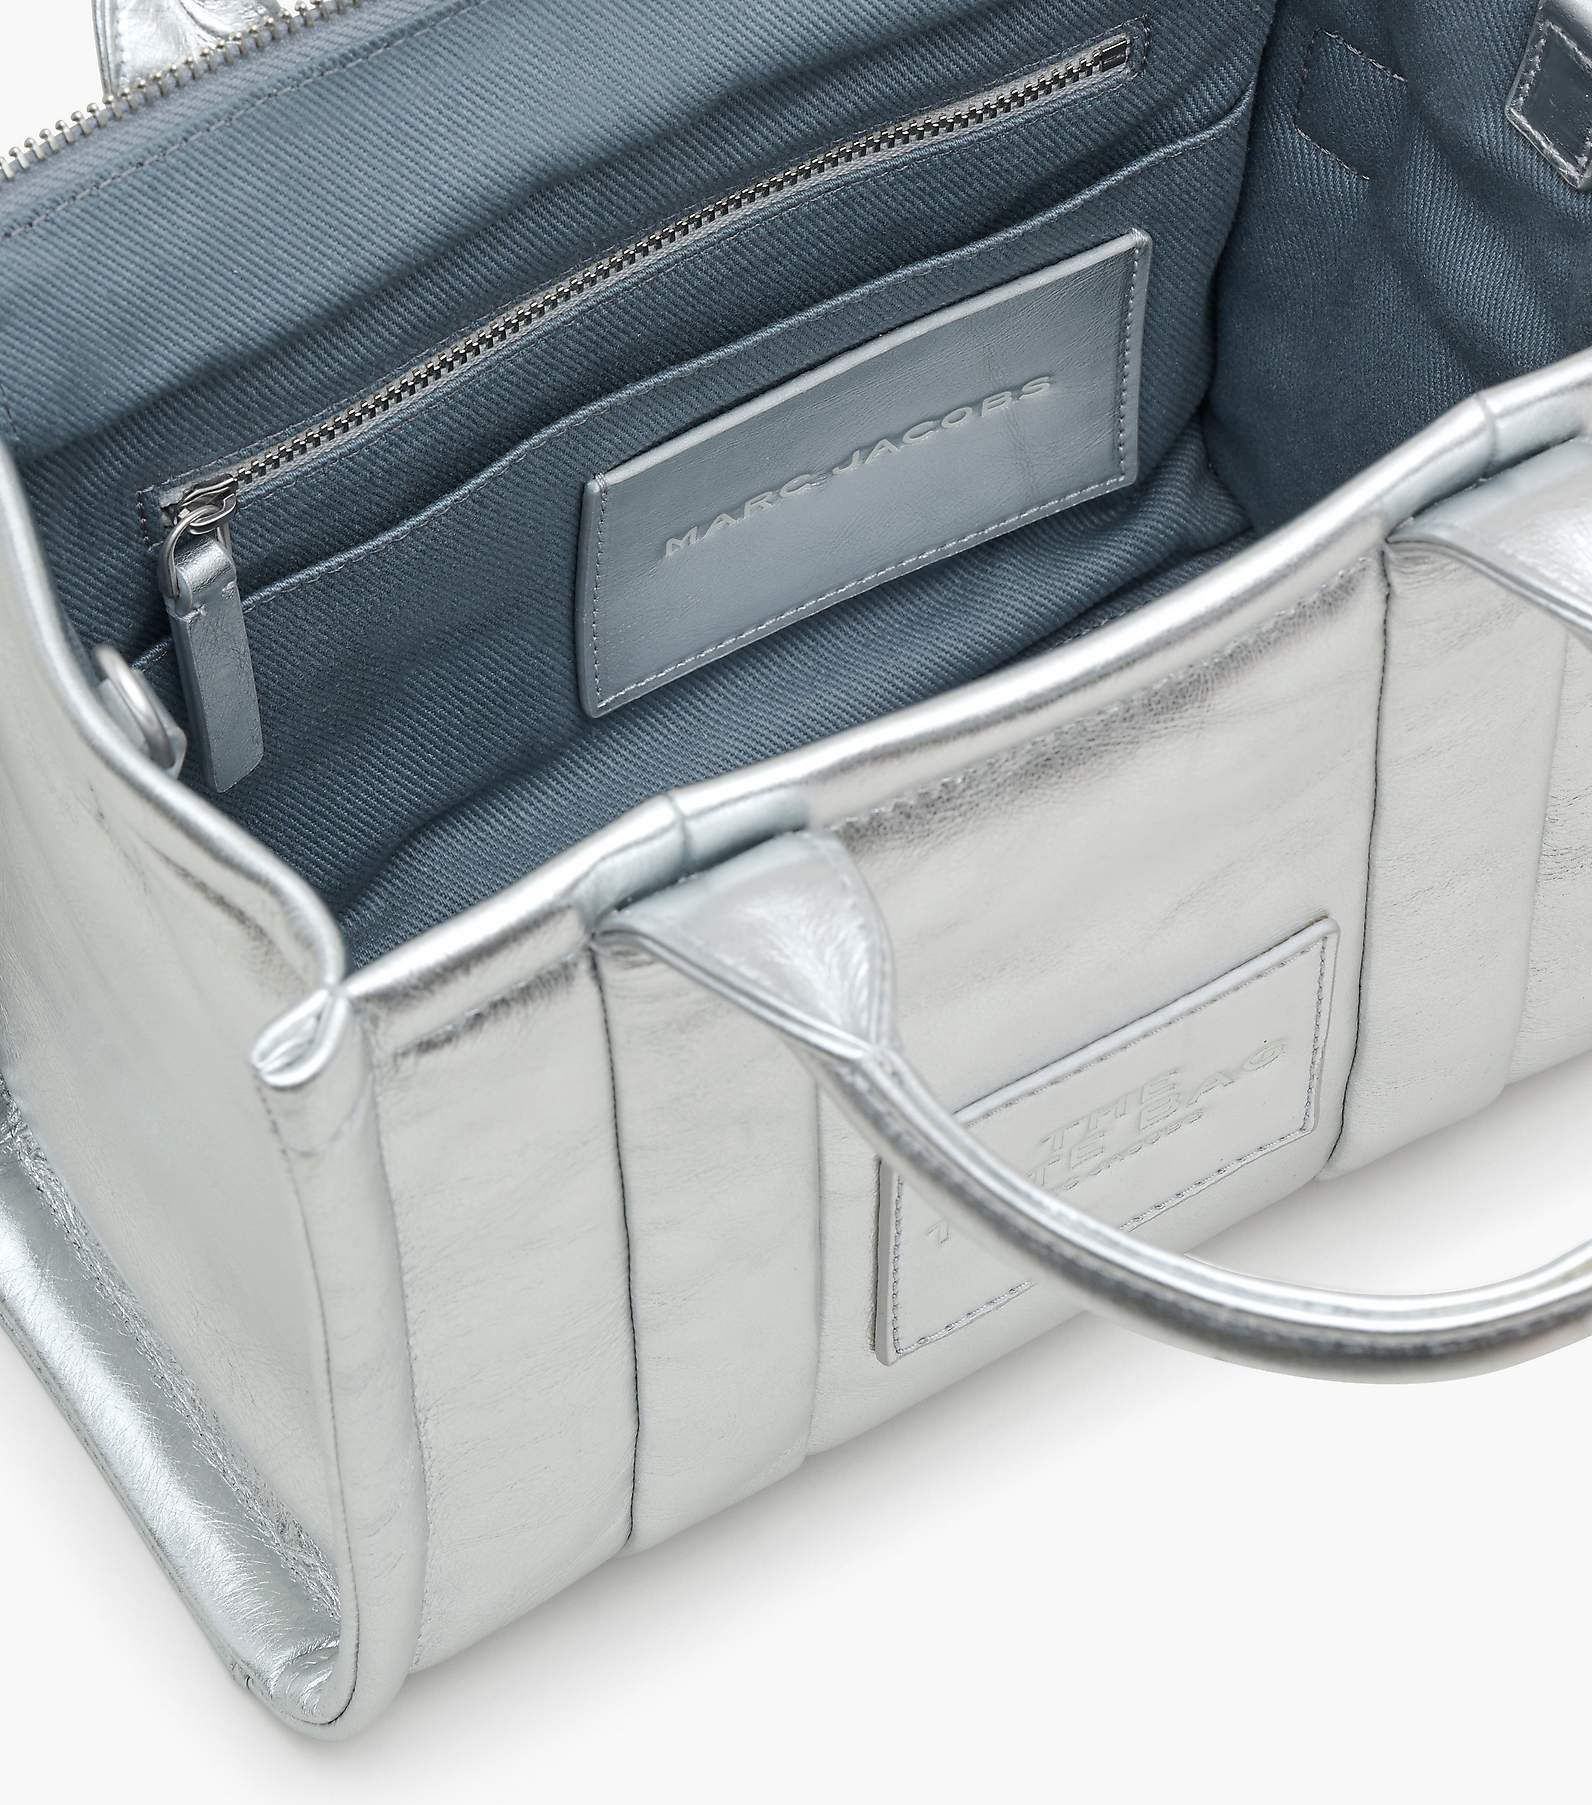 The Mini Leather Tote Bag in Silver - Marc Jacobs